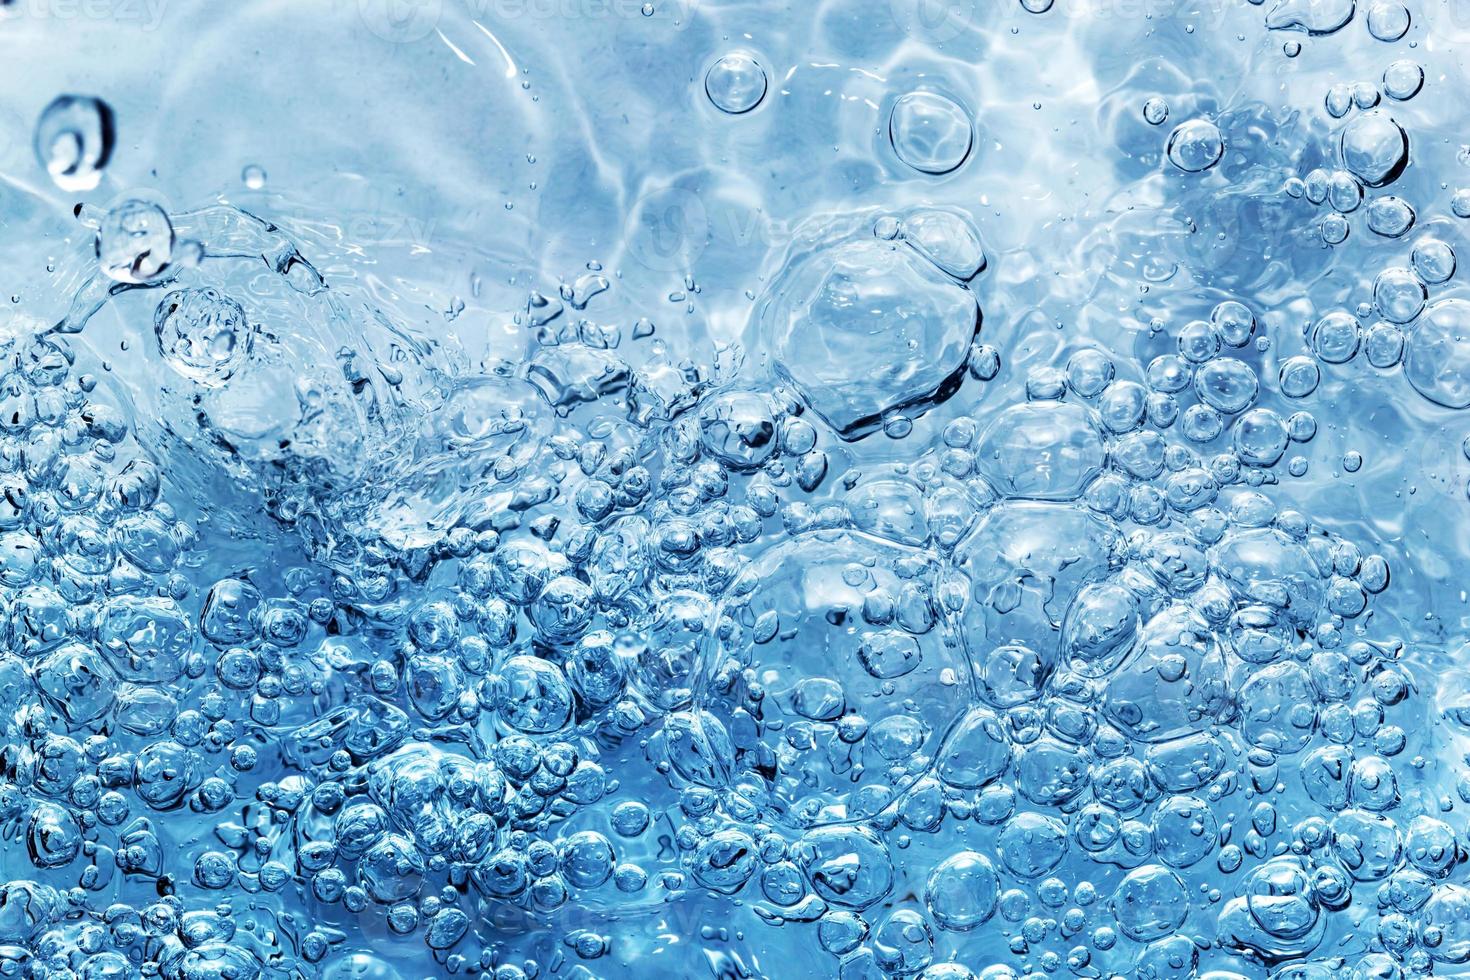 Clean water with bubbles appearing when pouring water or a splash photo